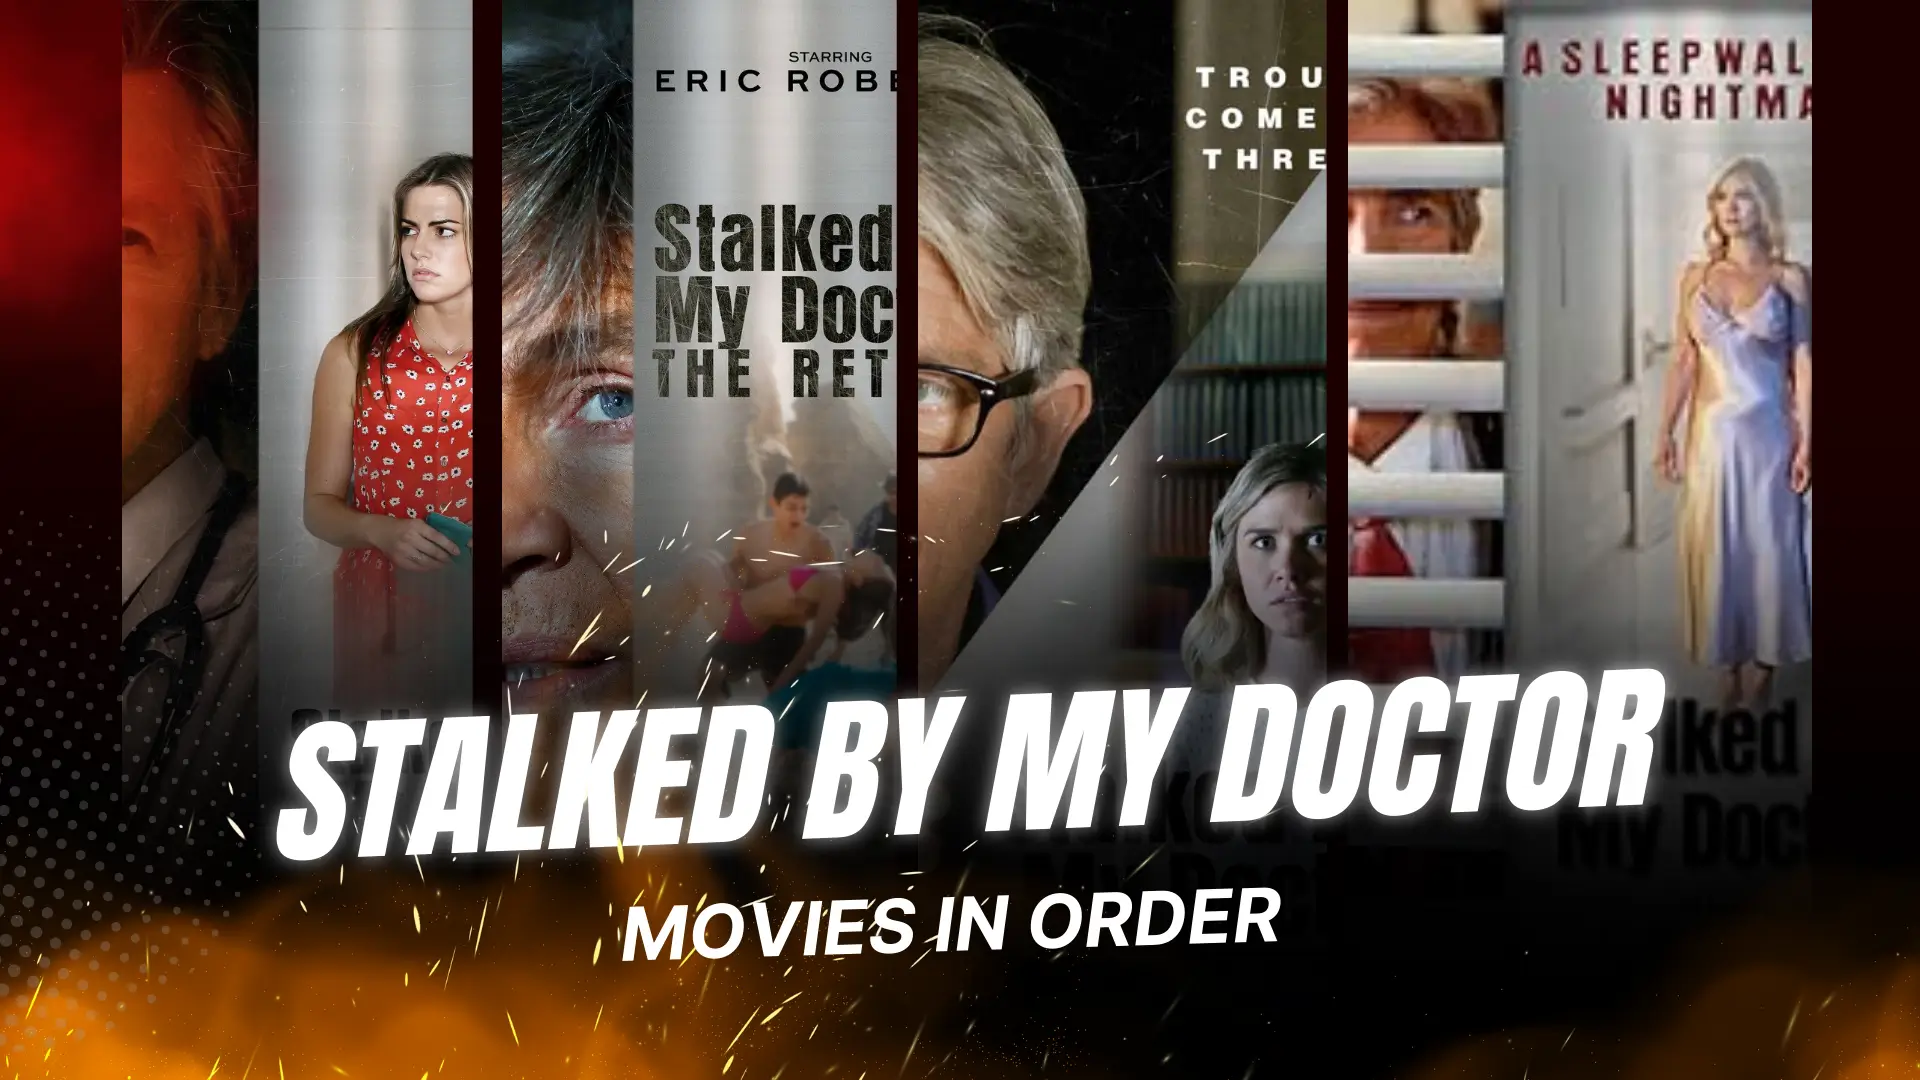 Stalked by my Doctor movies in Order